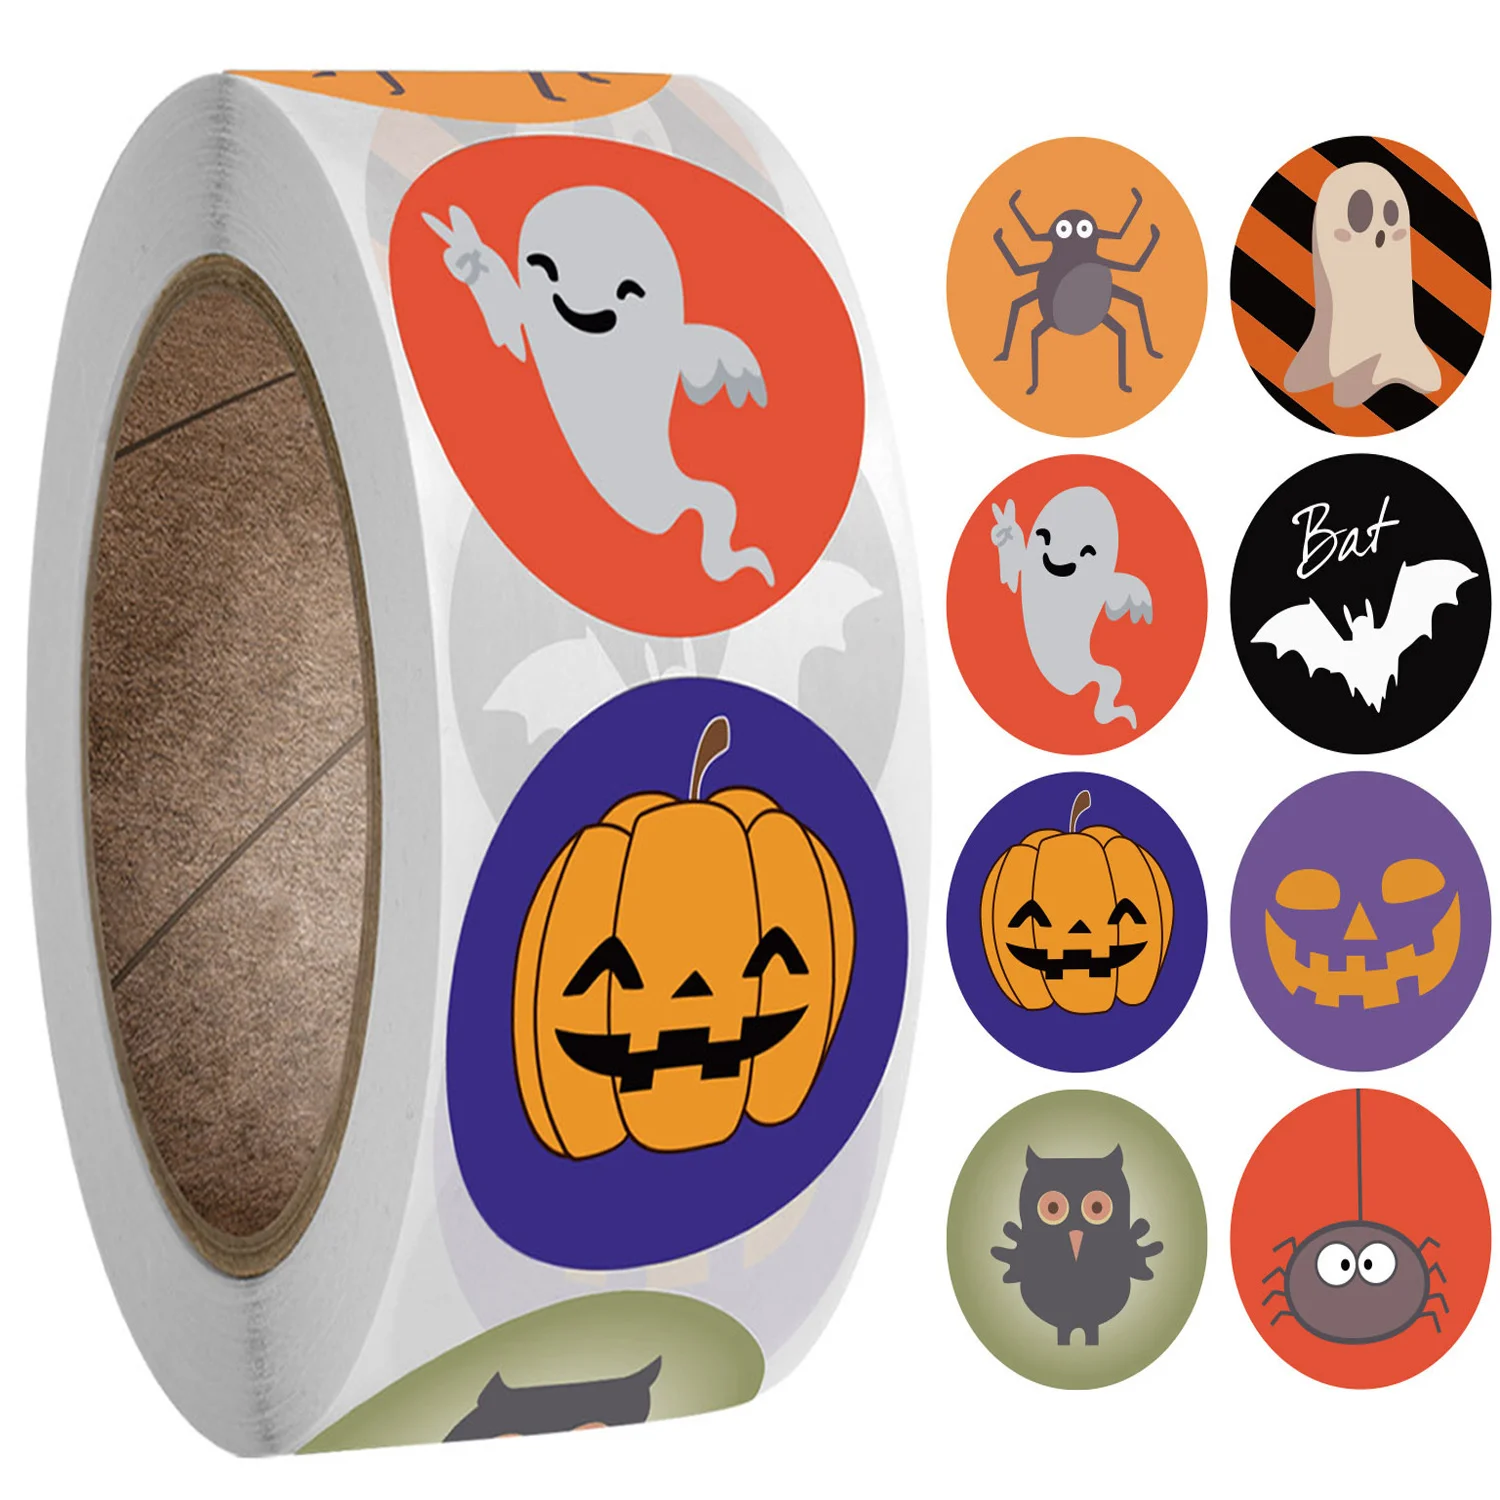 

500pcs Halloween Stickers for Kids Pumpkin Bat Spider Round Seal Label Stickers Envelope Seals Paster for Halloween Party Decor